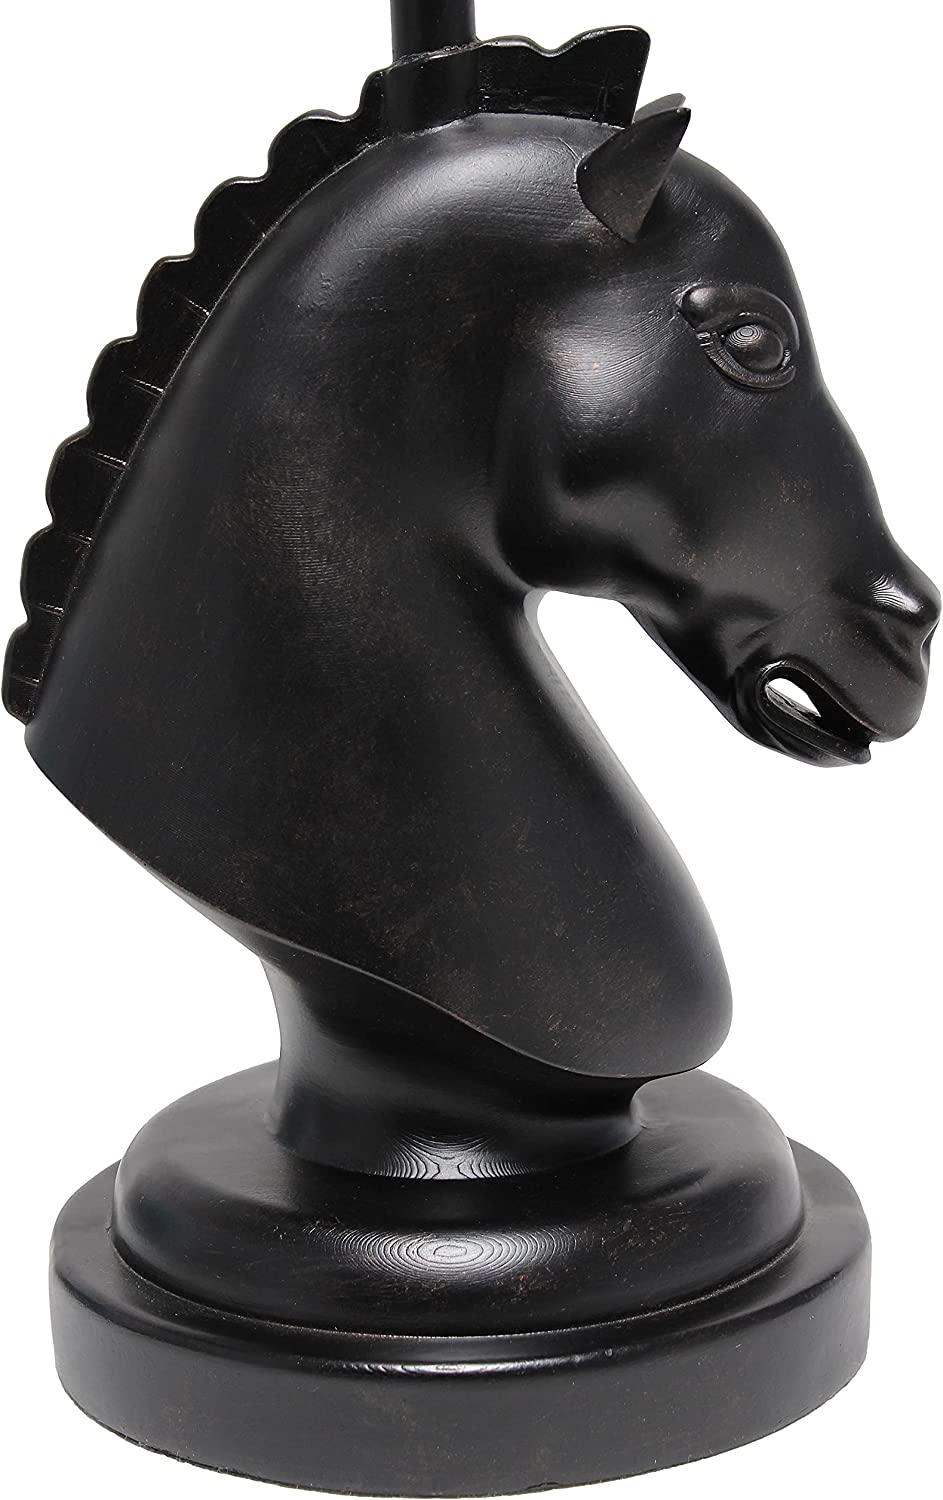 Simple Designs LT1089-BLK 17.25" Tall Polyresin Decorative Chess Horse Bedside Table Desk Lamp w White Tapered Fabric Shade for Décor, Accent Lighting, Gameroom, Kids' Room, Living Room, Bedroom, BLK